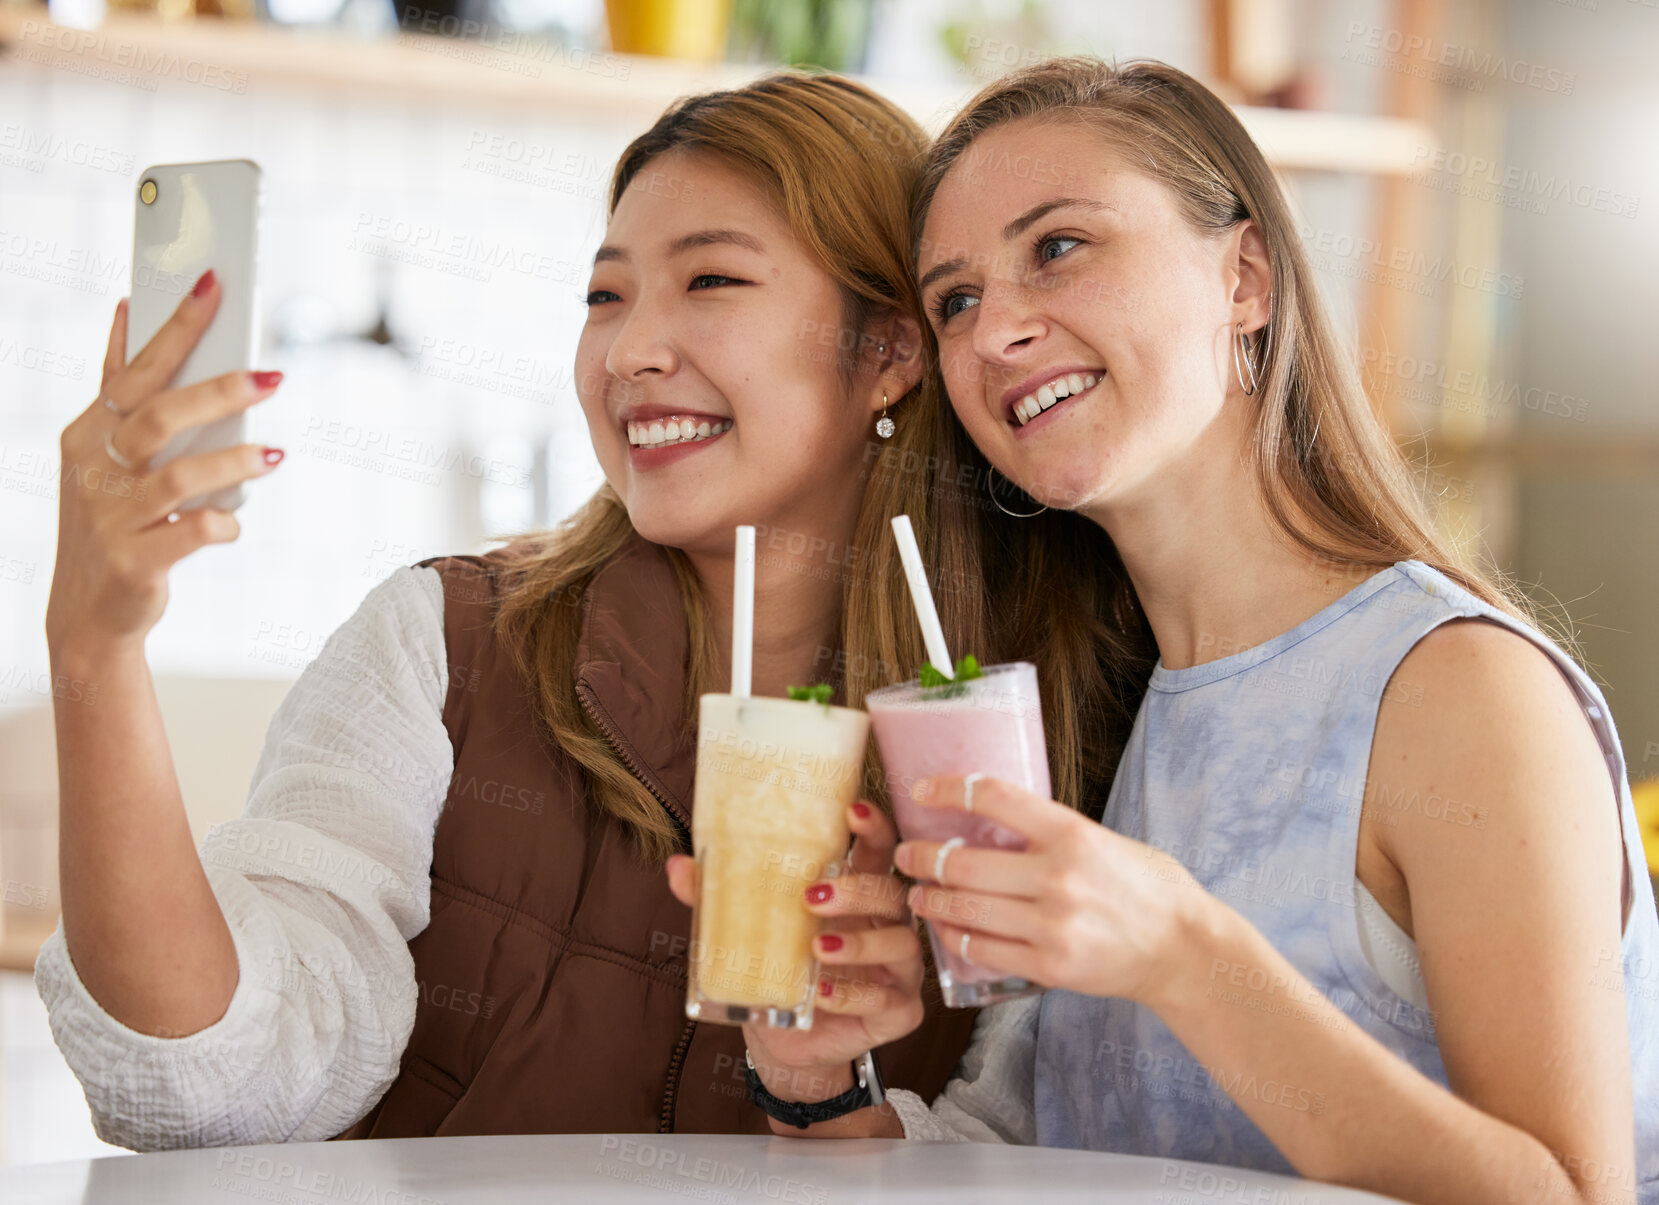 Buy stock photo Selfie, cocktails or friends take profile picture in cafe with happy smile on holiday vacation or weekend. Social media, Asian or young women smiling in restaurant for fun brunch date with drinks